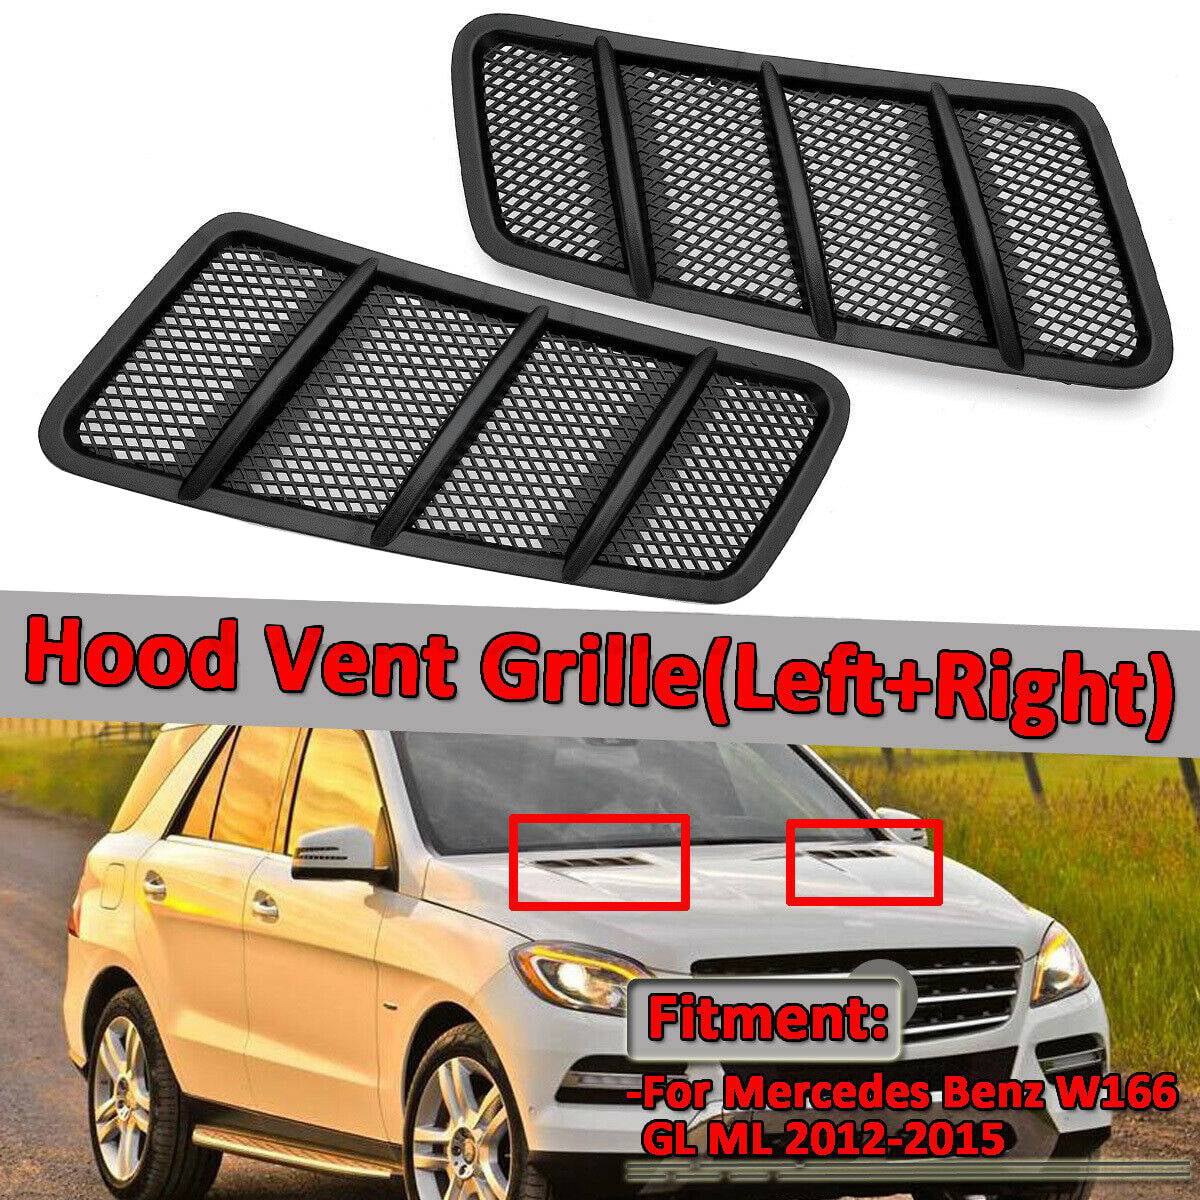 wroadavee Exterior Front Hood Air Vent Cover Trim for Mercedes-Benz ML W166 2012-2015 GL X166 2013-2015 